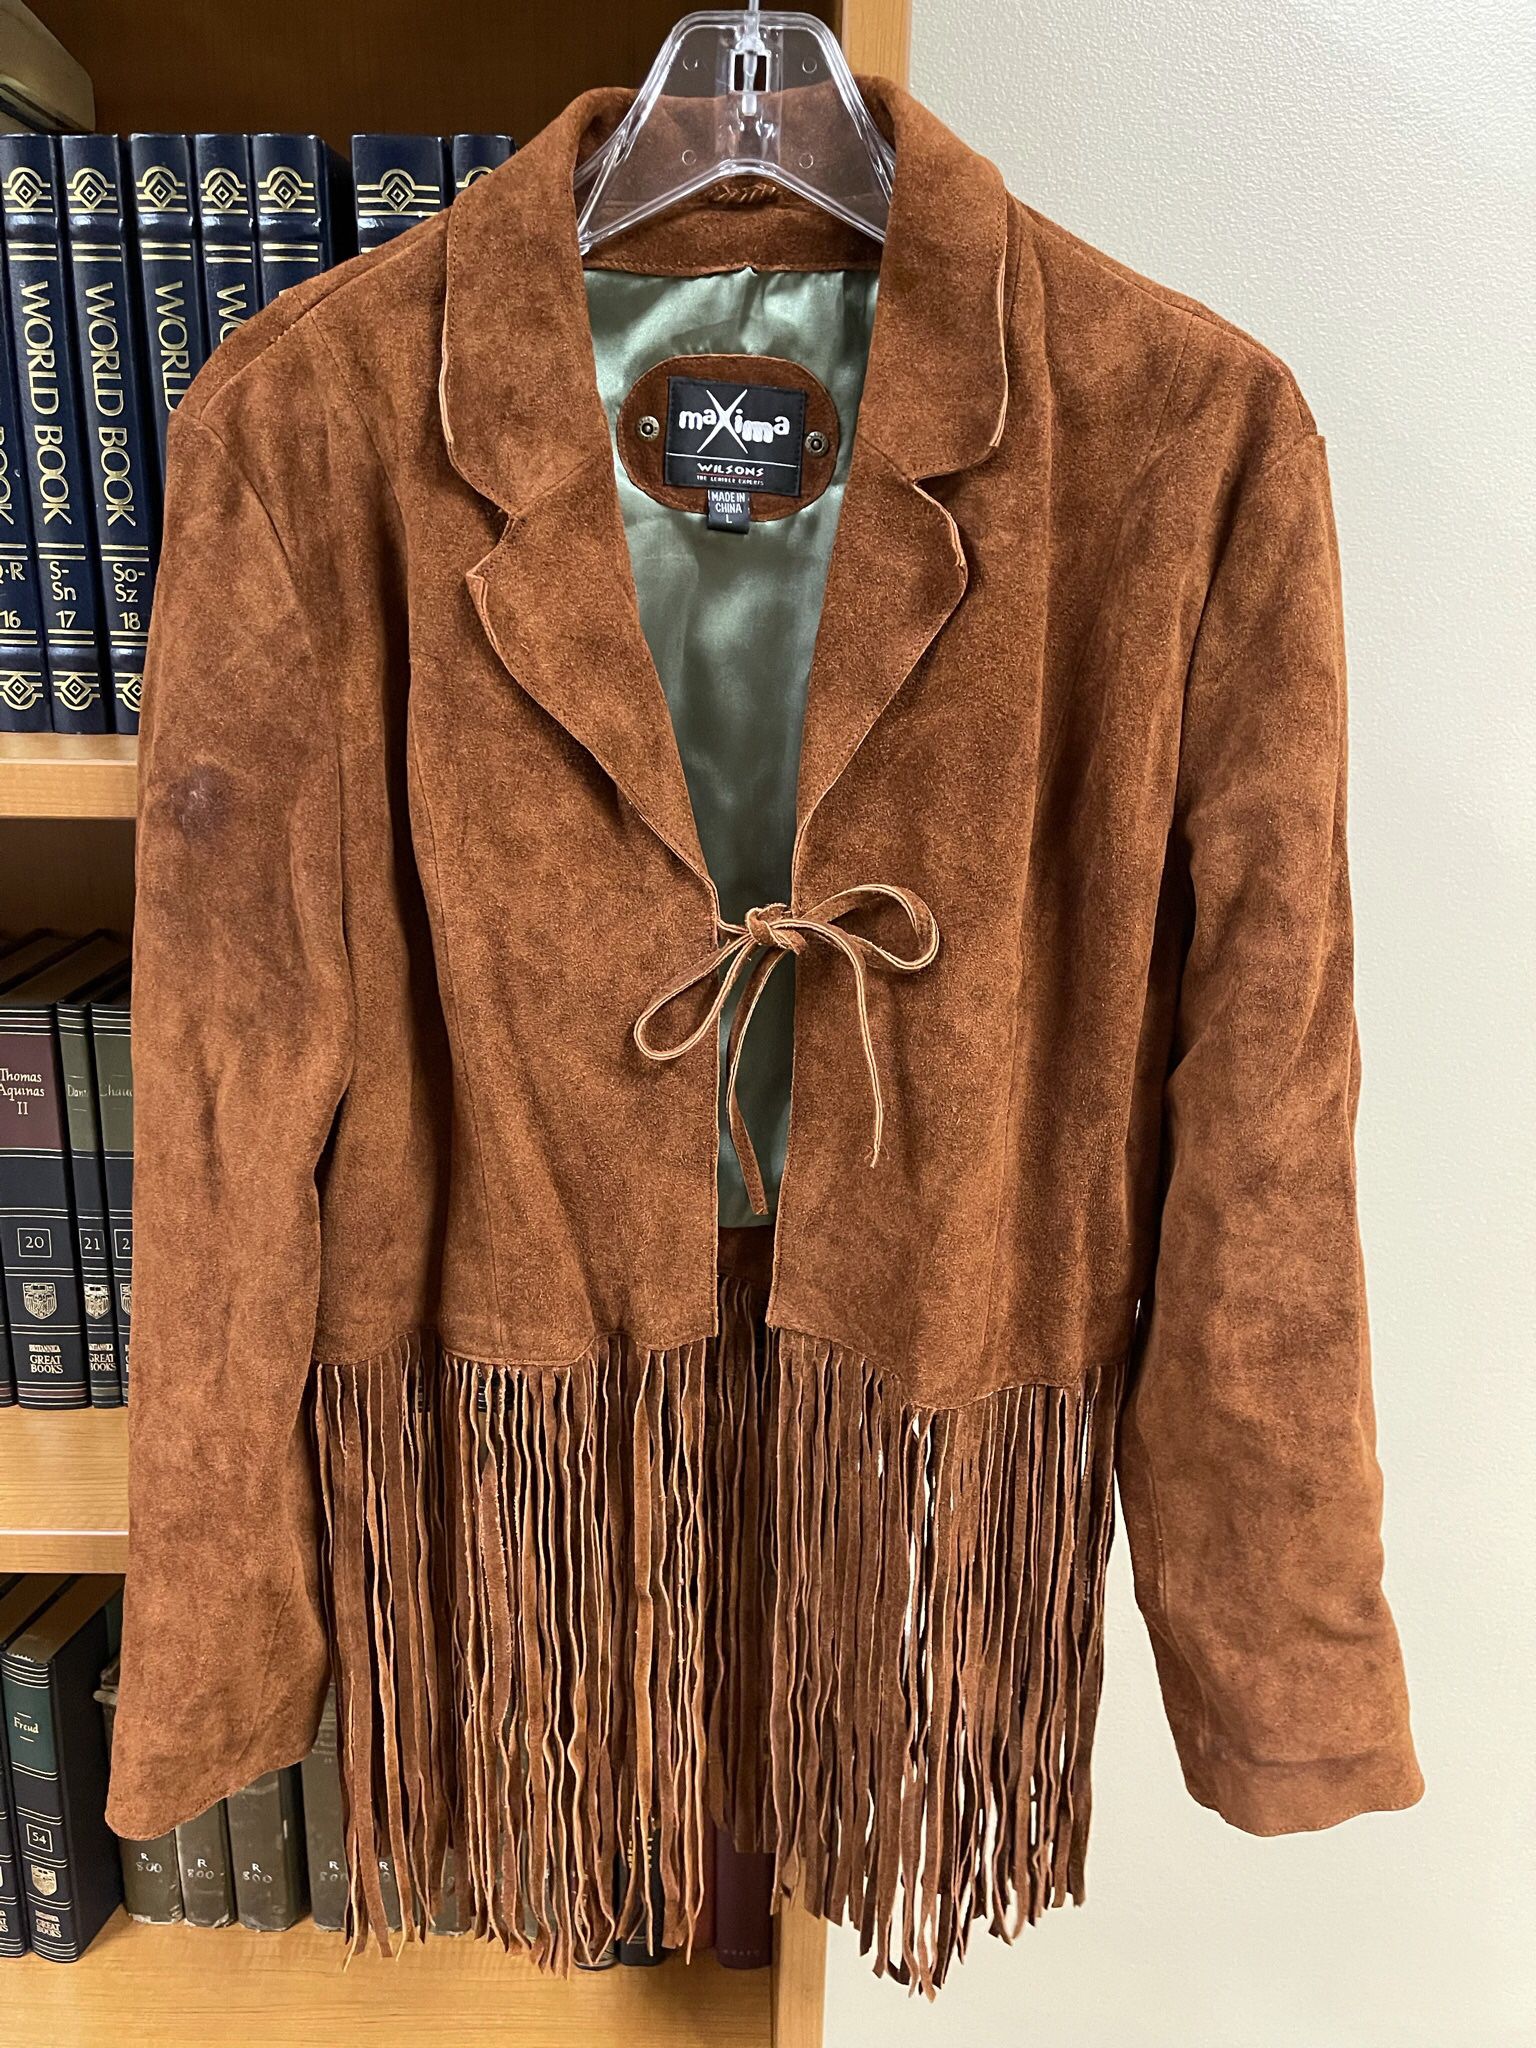 NEW!! Woman’s SUEDE LEATHER JACKET with FRINGE - Size LARGE - firm price (pls. read full description details)